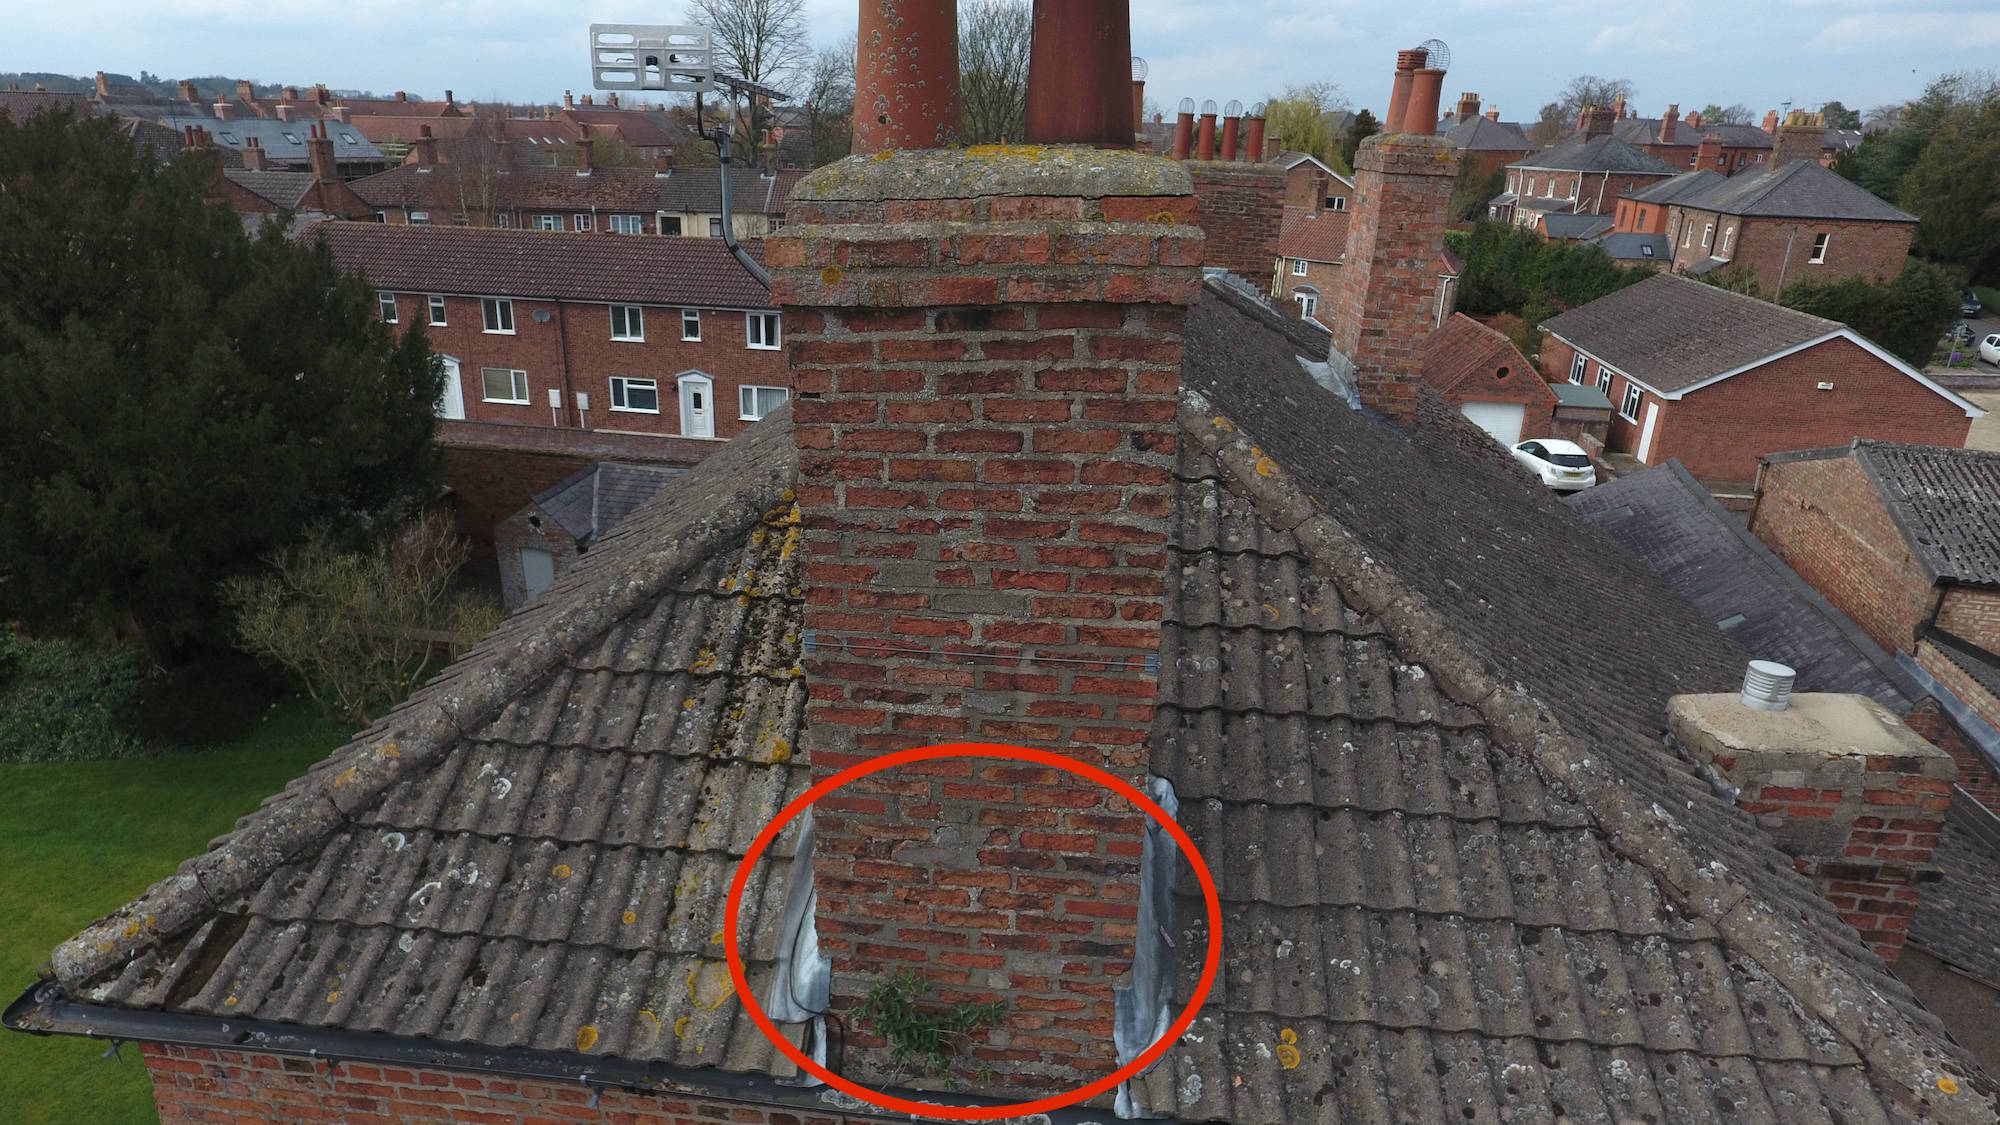 Drone allows close up view of chimney defects